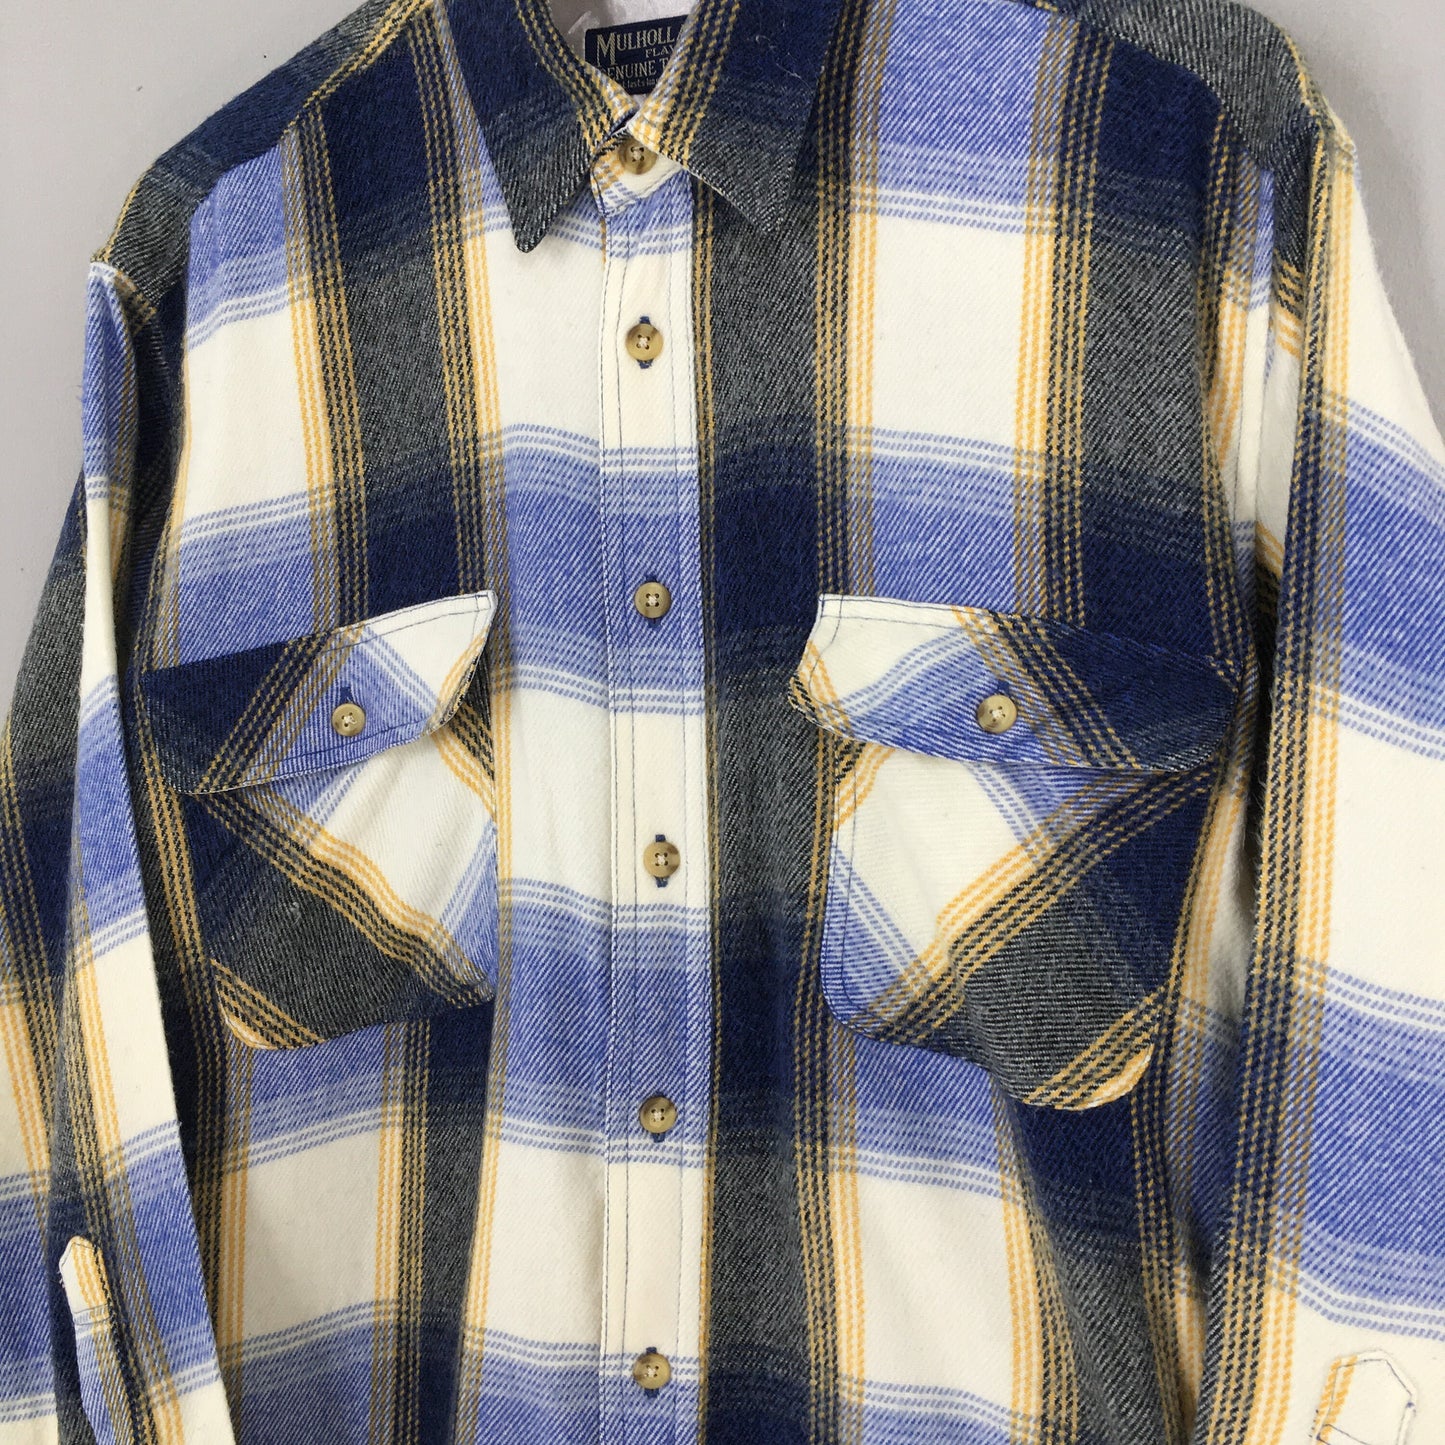 Checkered Plaid Flannel Multicolor Shirt Large